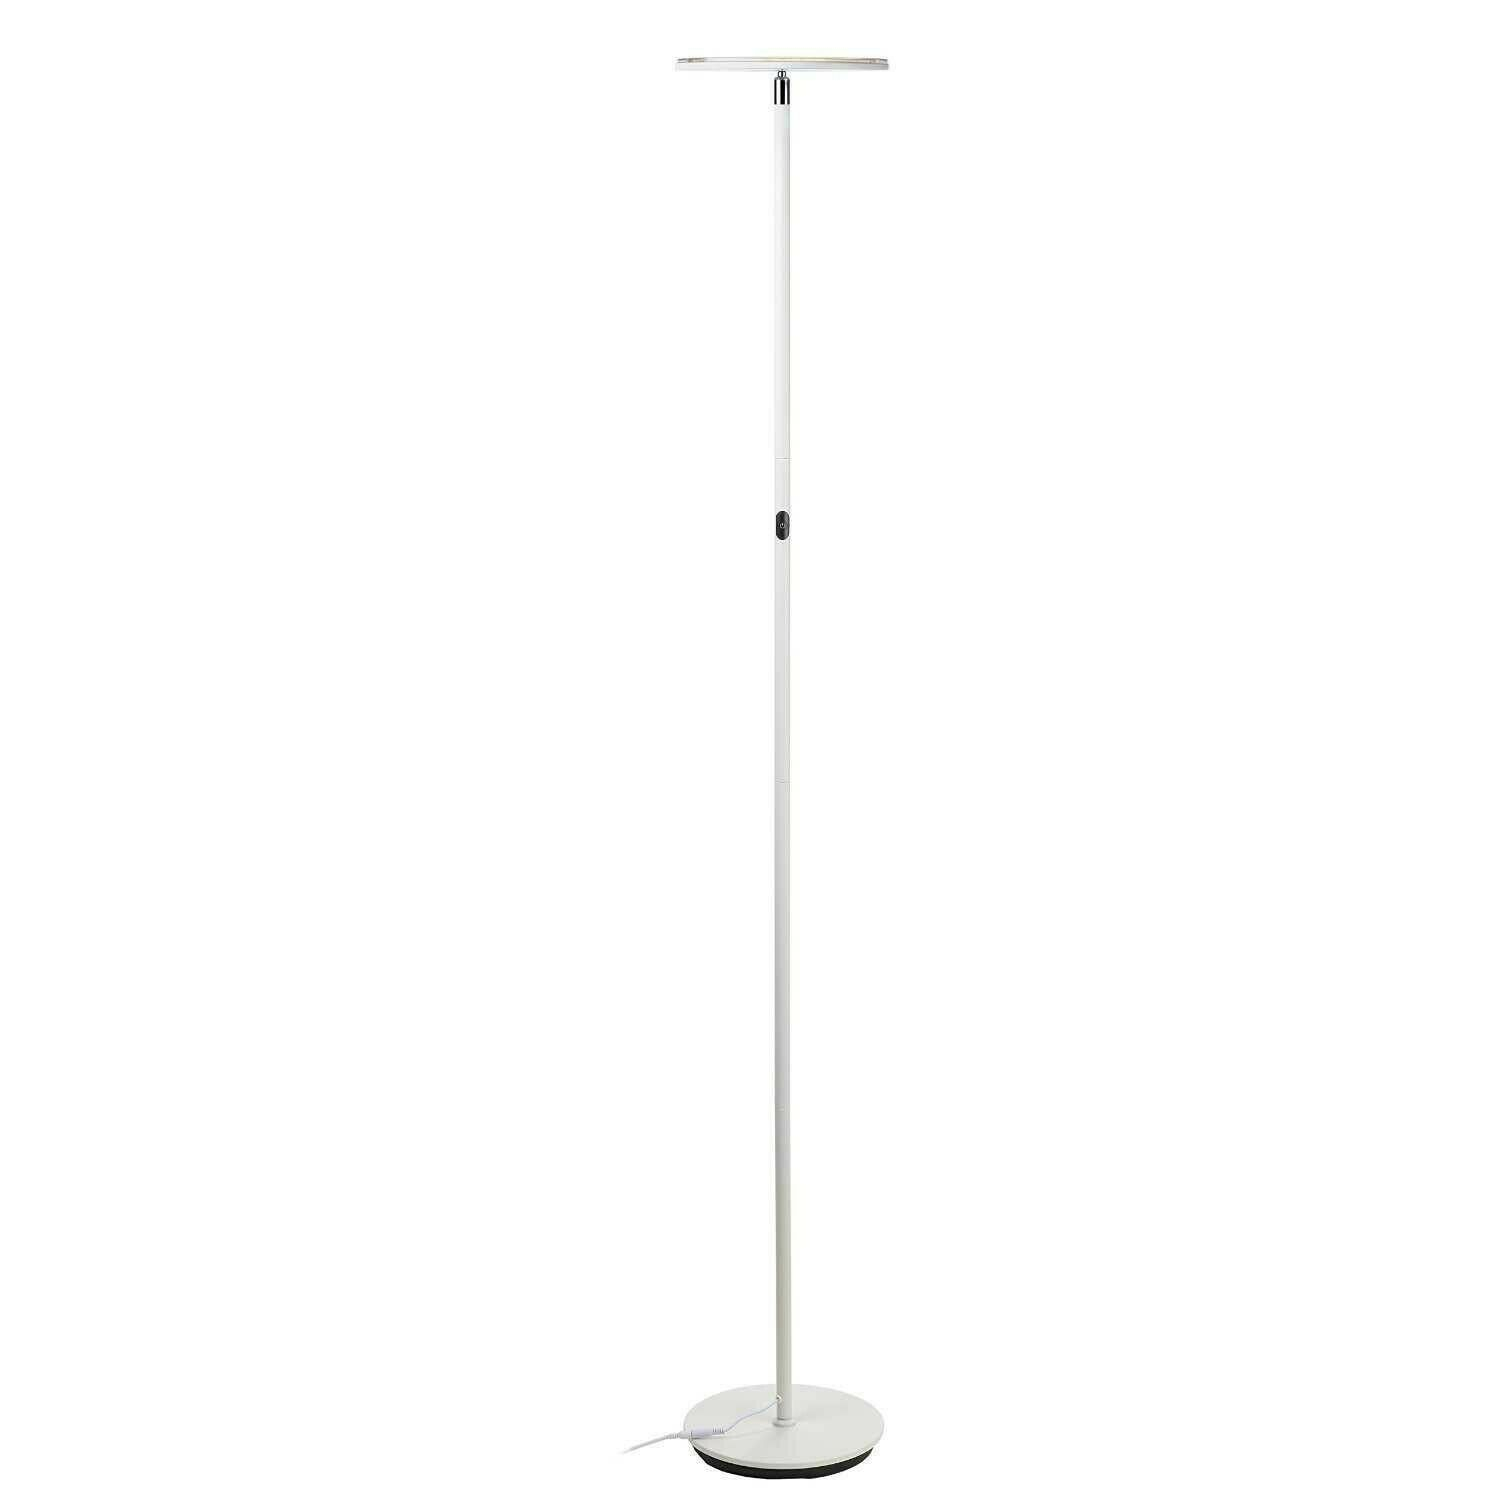 Brightech Sky Led Torchiere Floor Lamp Energy Saving 3x Dimmable Adjustable for dimensions 1500 X 1500